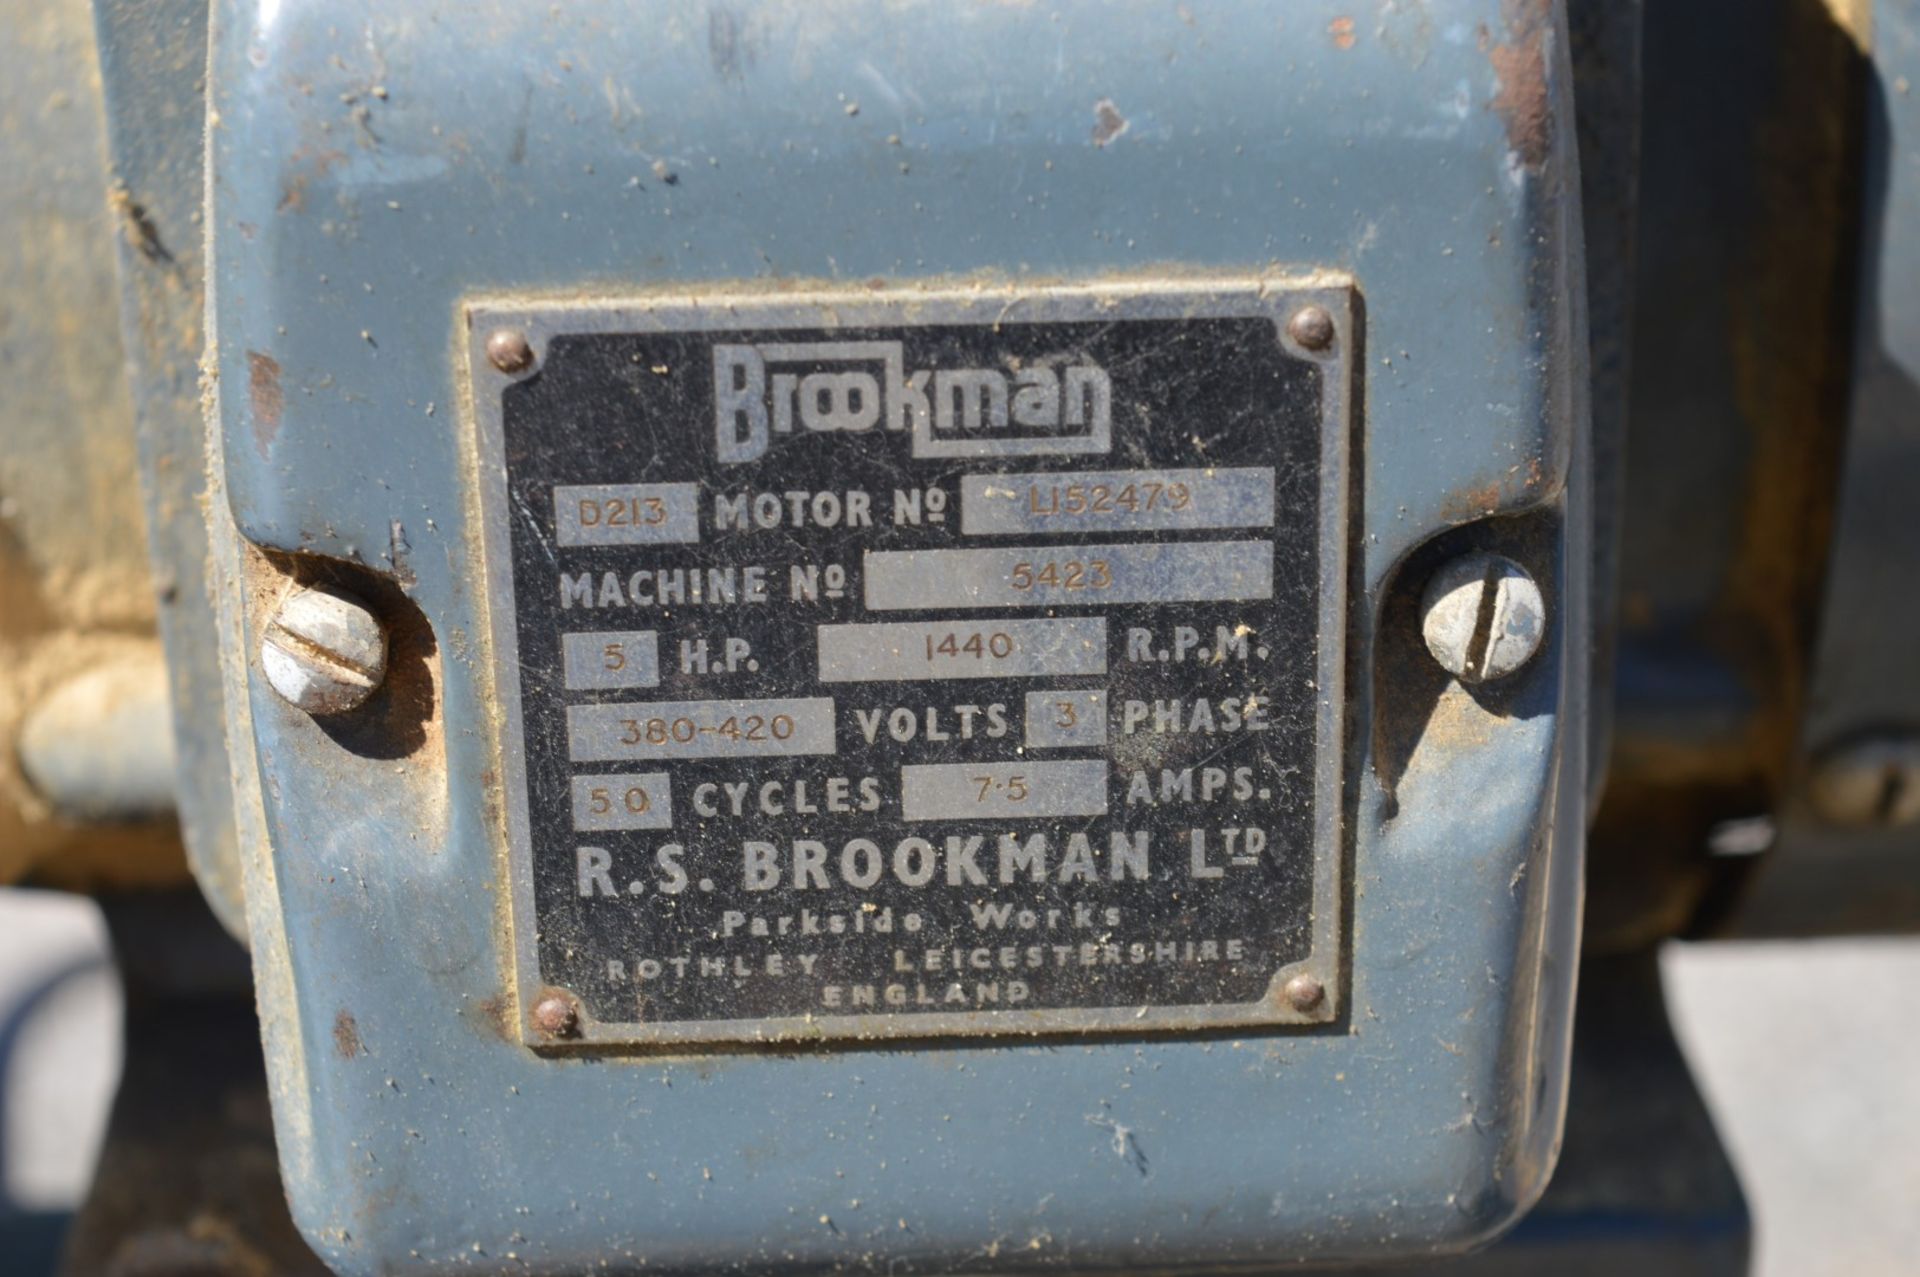 1 x Brookman Dovetailing Machine - Type ADM-1 - Serial No 5423 - 3 Phase - Dimensions H110 x W180 - Image 3 of 12